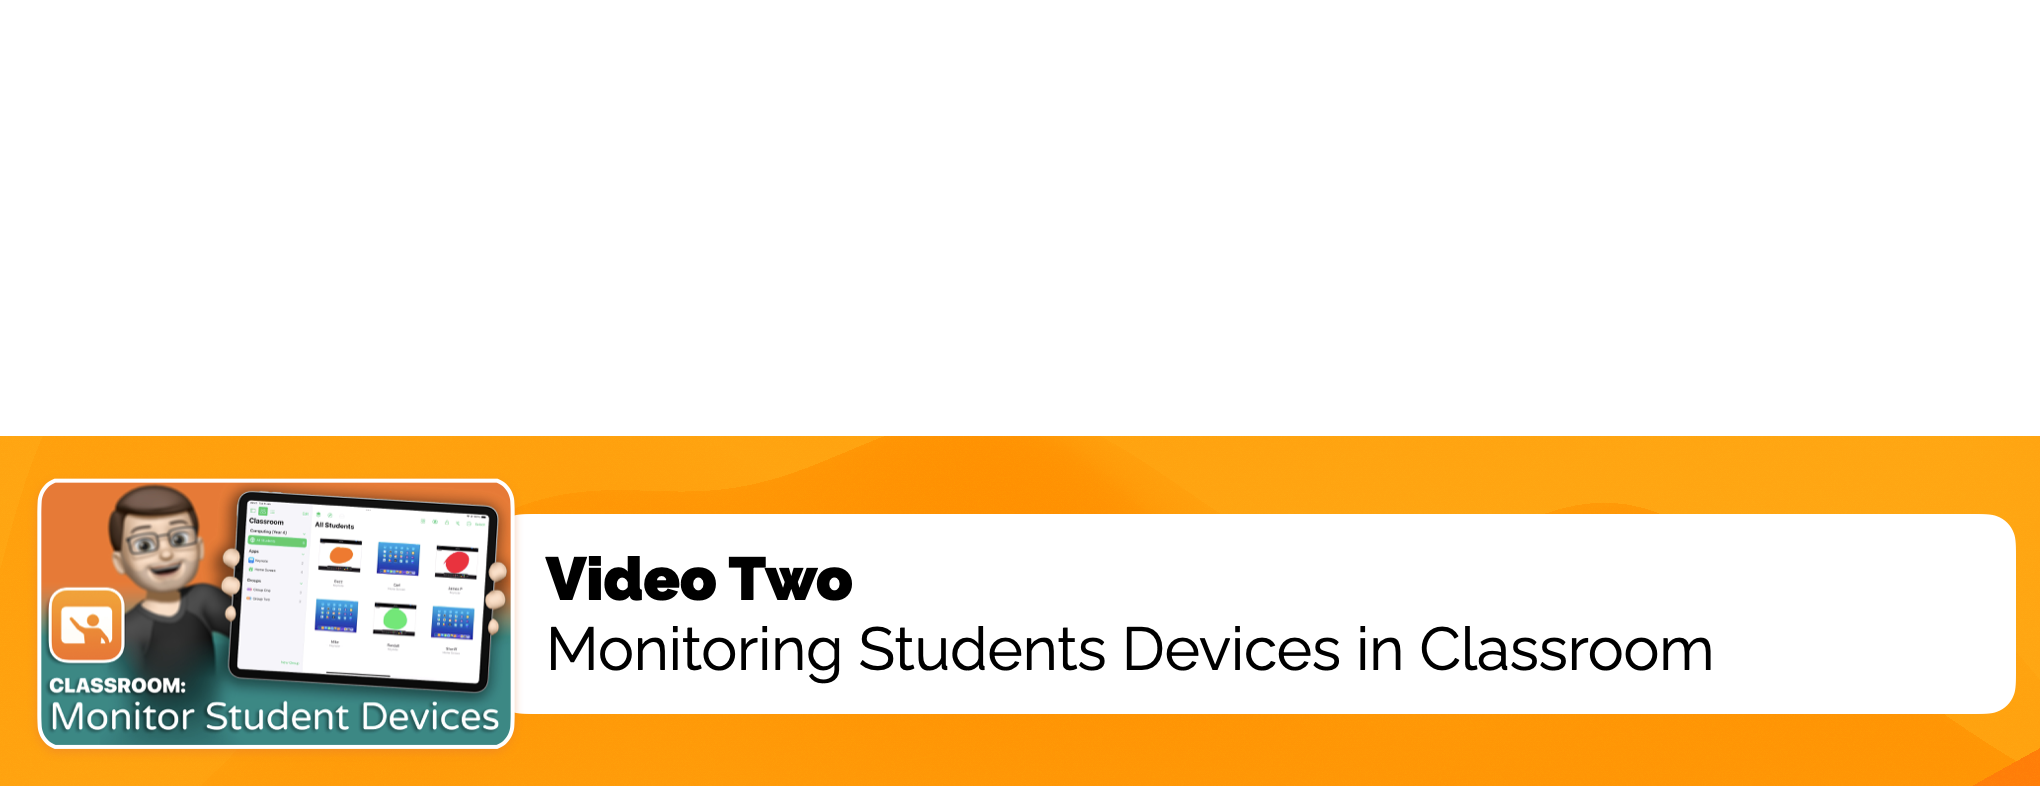 Video Two: Monitoring Students Devices in Classroom